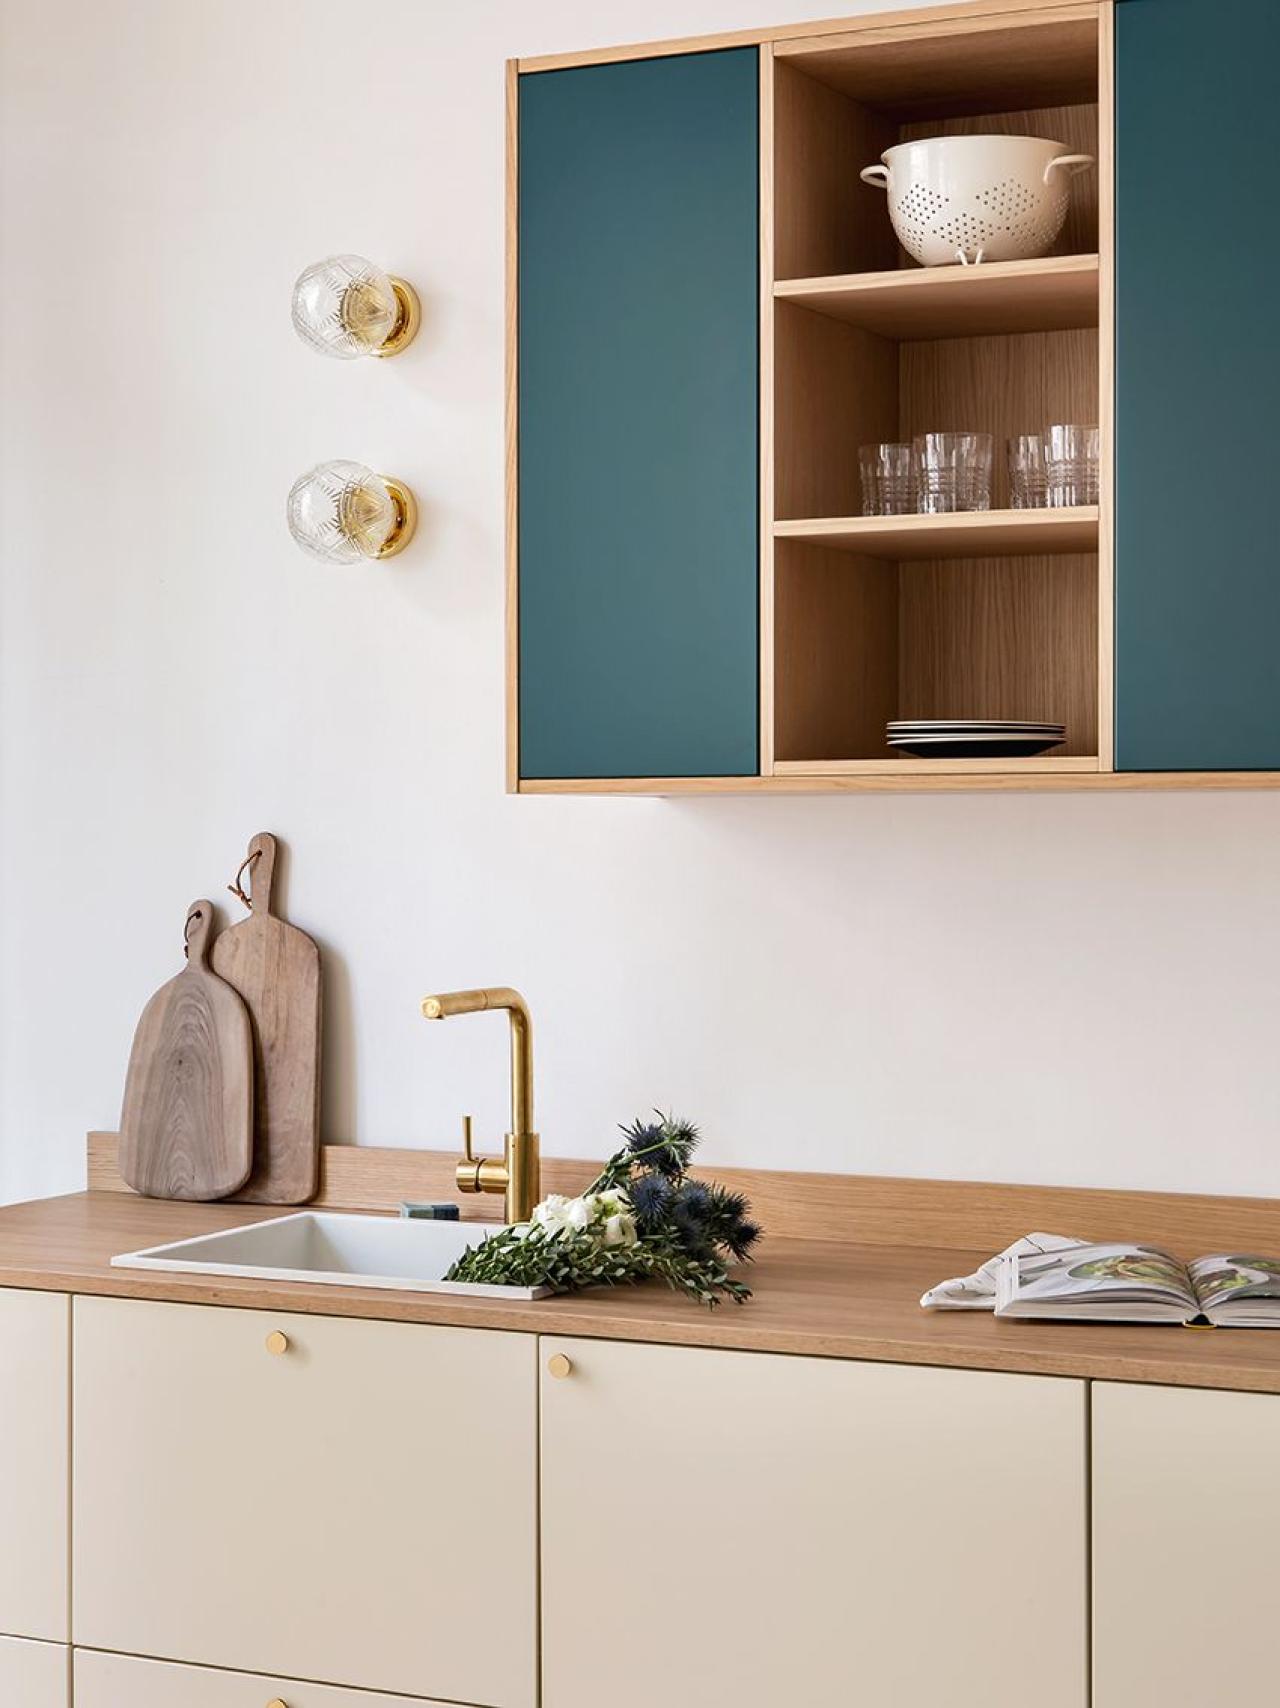 Ivoire and Vert sauvage kitchen, with open cabinets